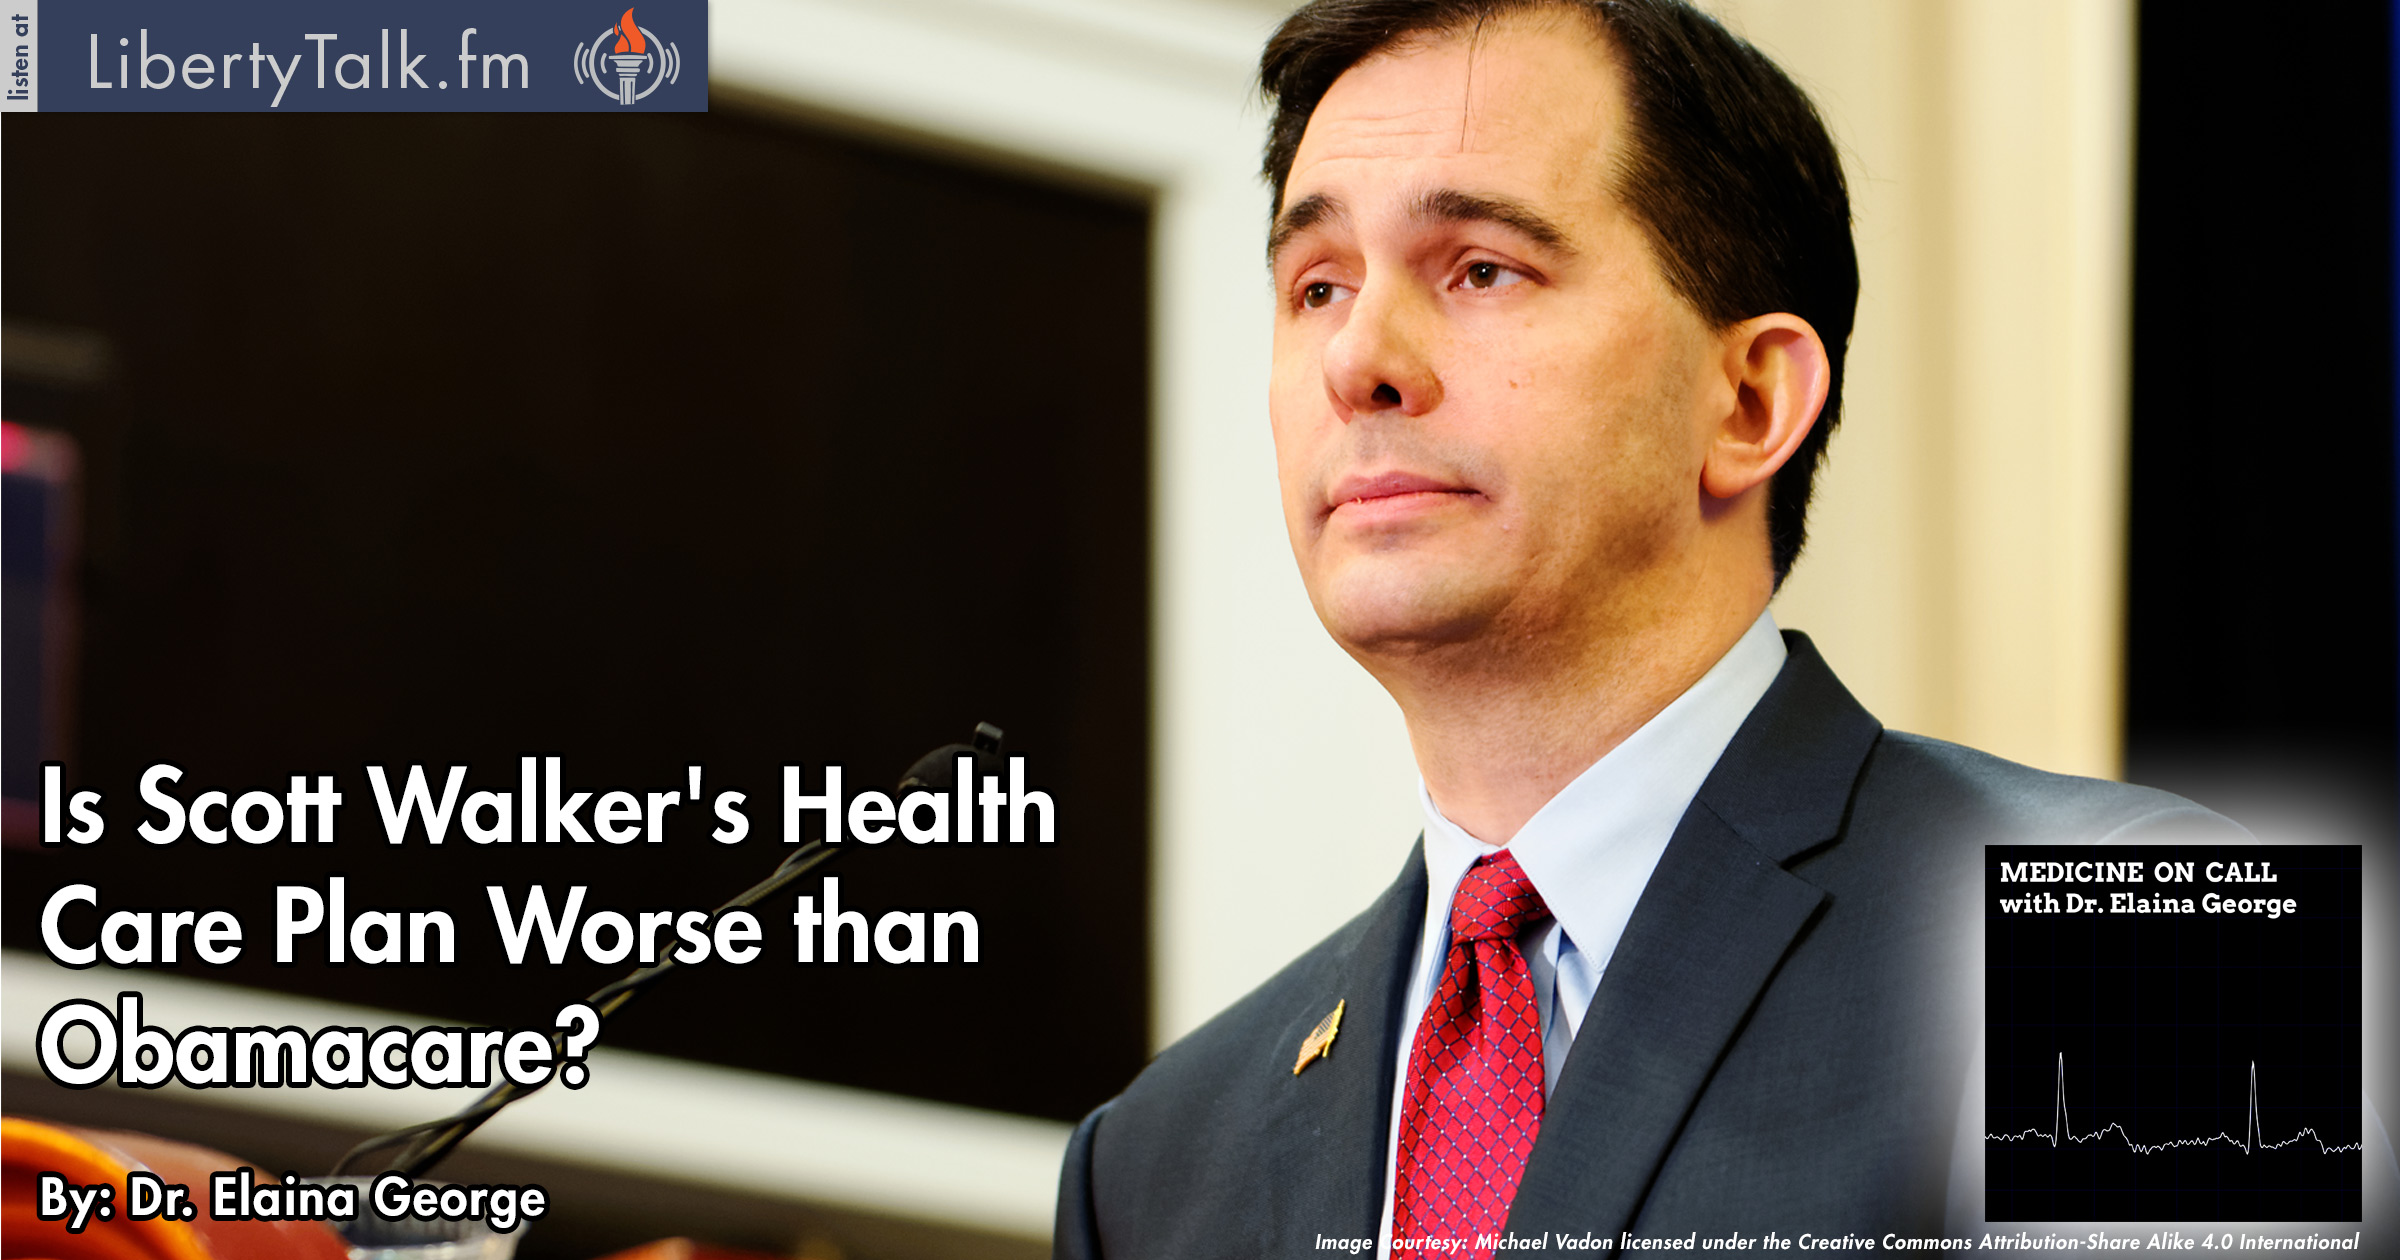 Is Scott Walker's Health Care Plan Worse than Obamacare?